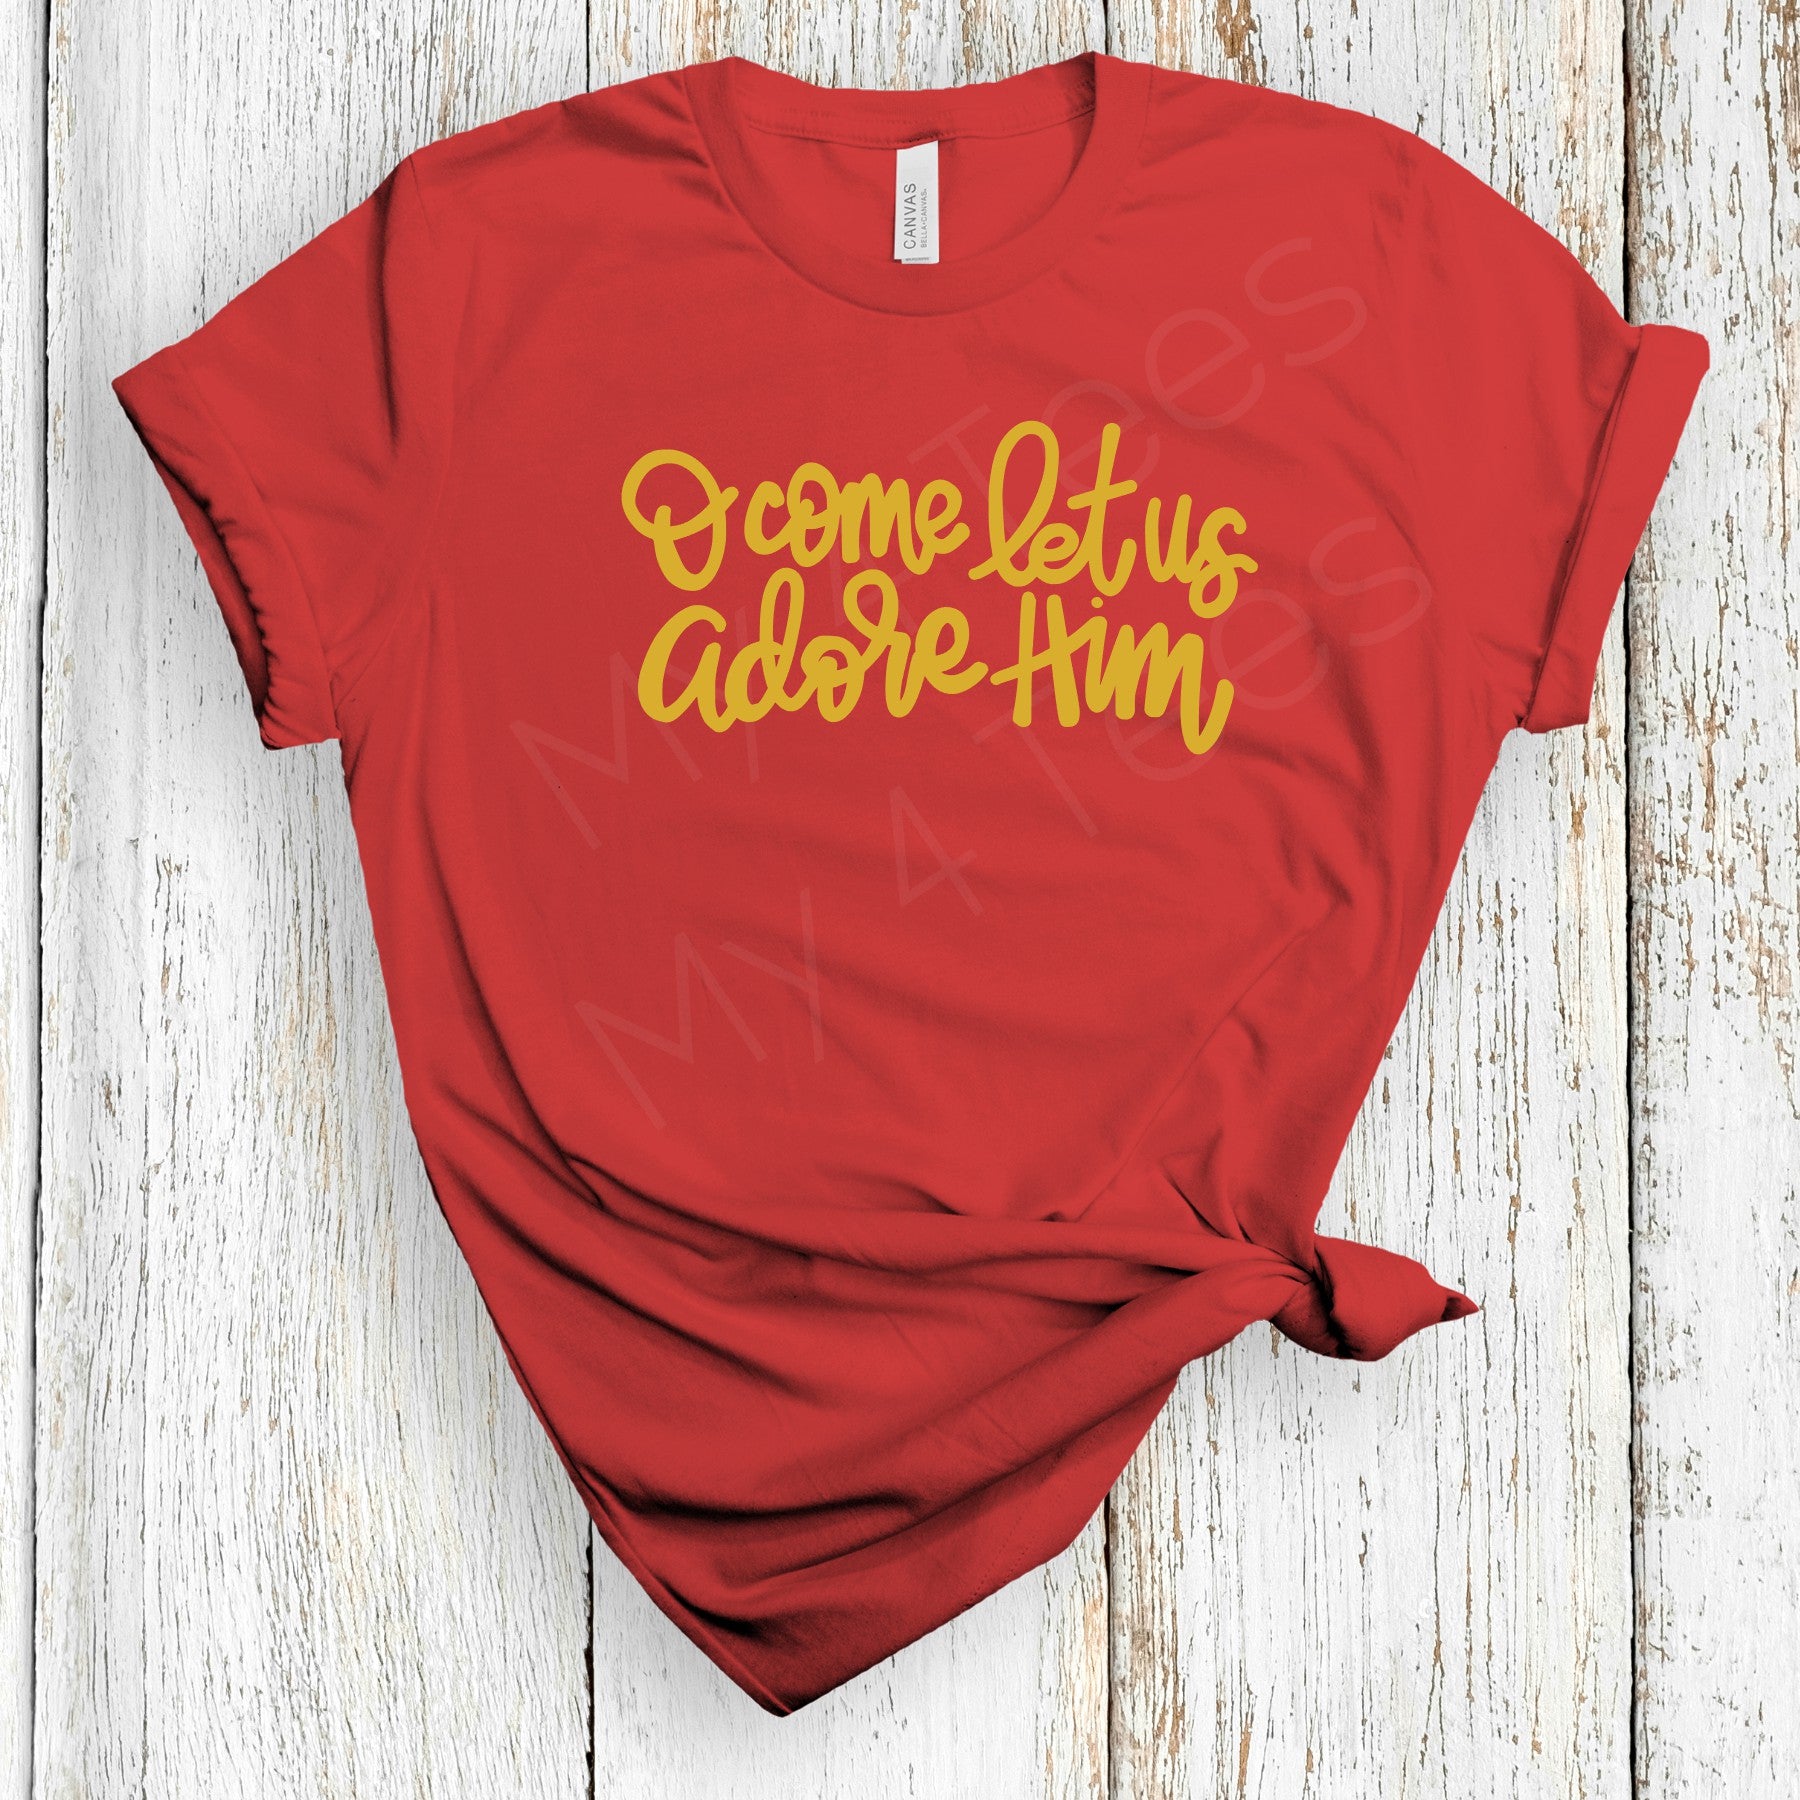 O come let us Adore Him Christmas graphic tee in adult sizes  |  Holiday t-shirt in adult sizes